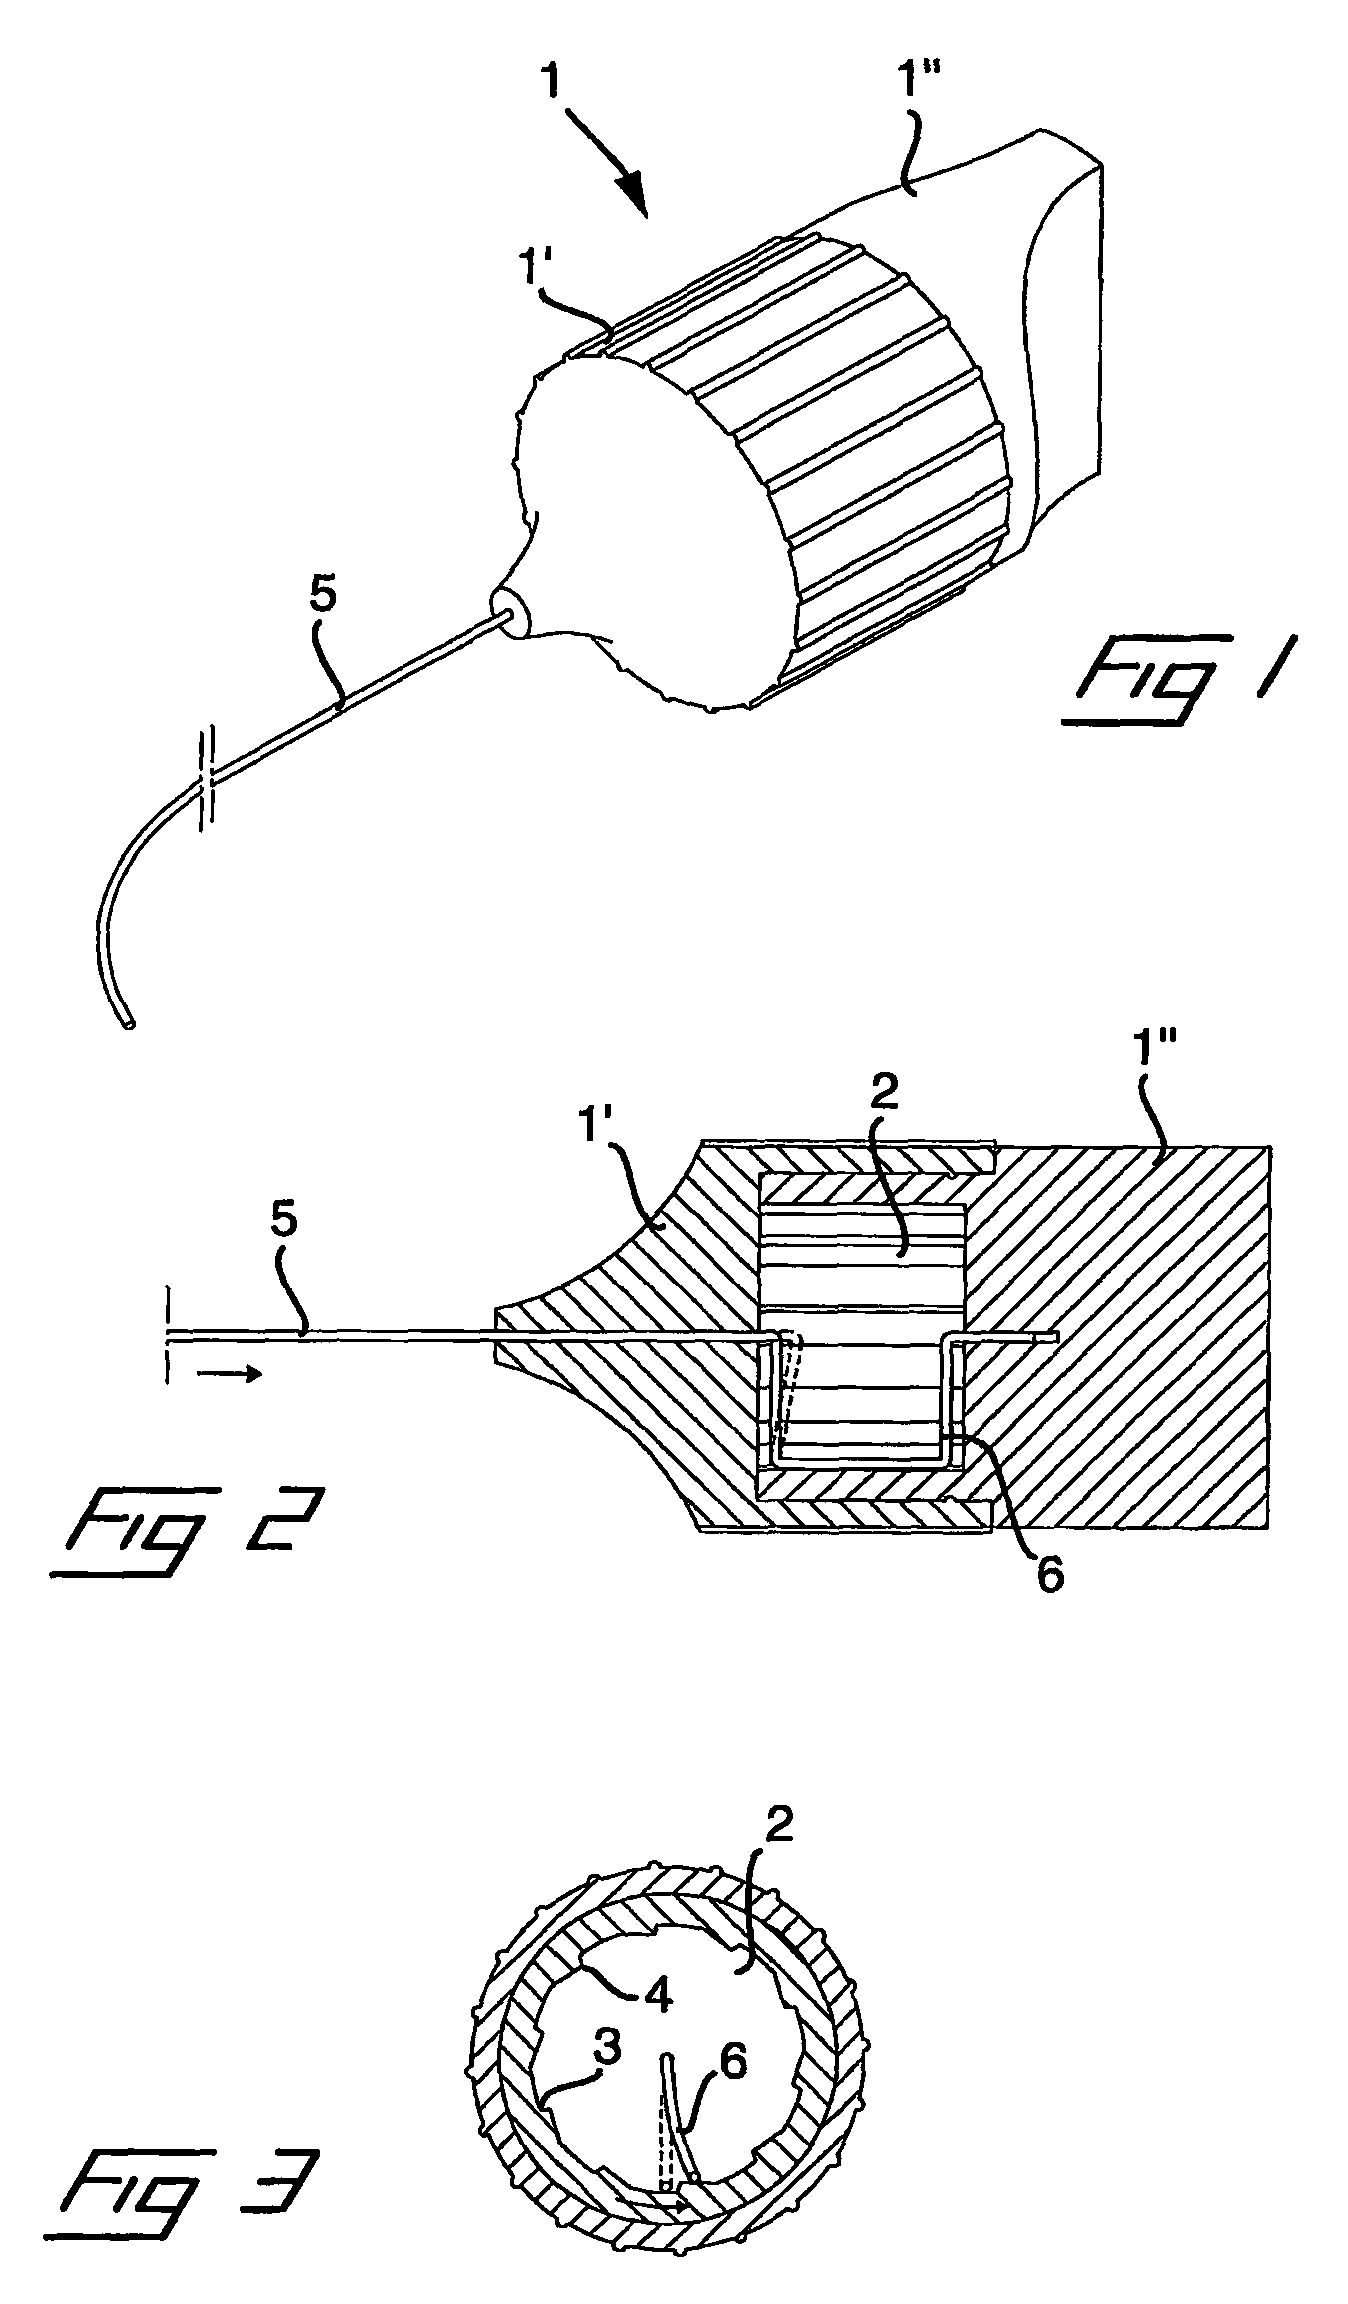 Tool and a method for attaching a cardiac stimulator lead at a desired position inside a heart